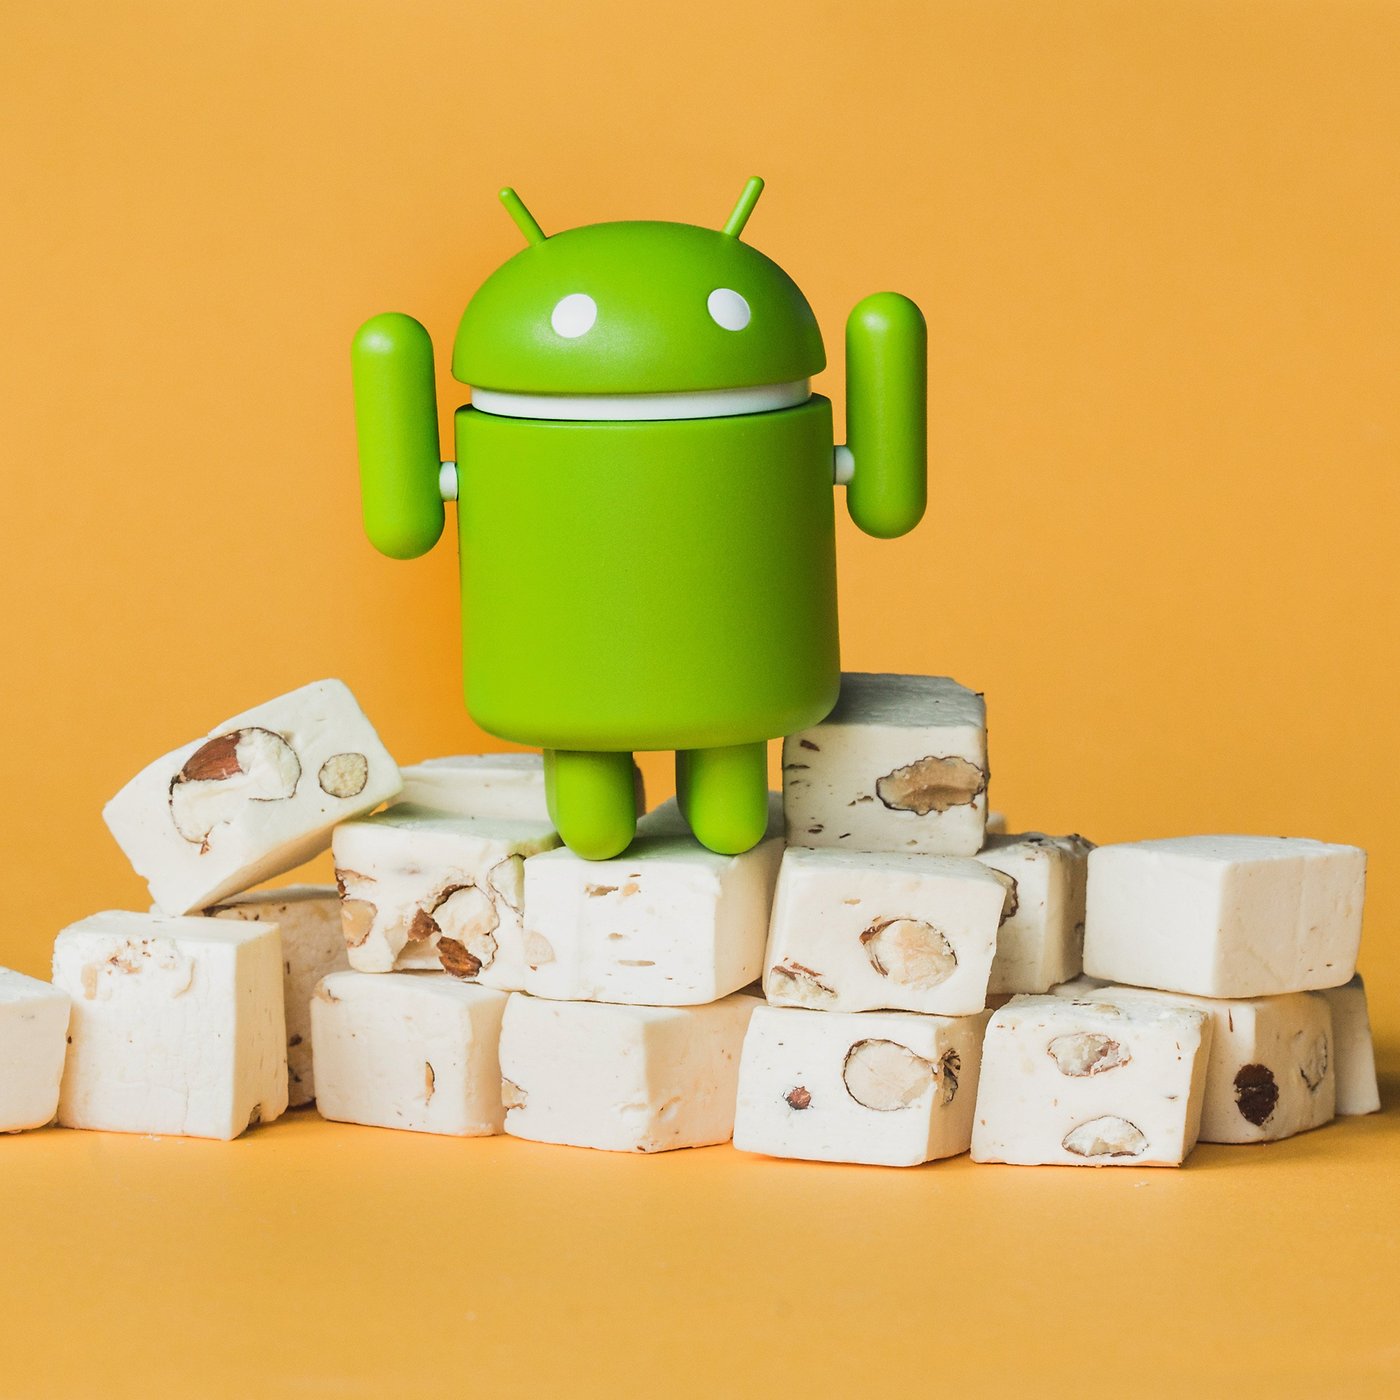 Android 7 Nougat update overview for smartphones and tablets | nextpit